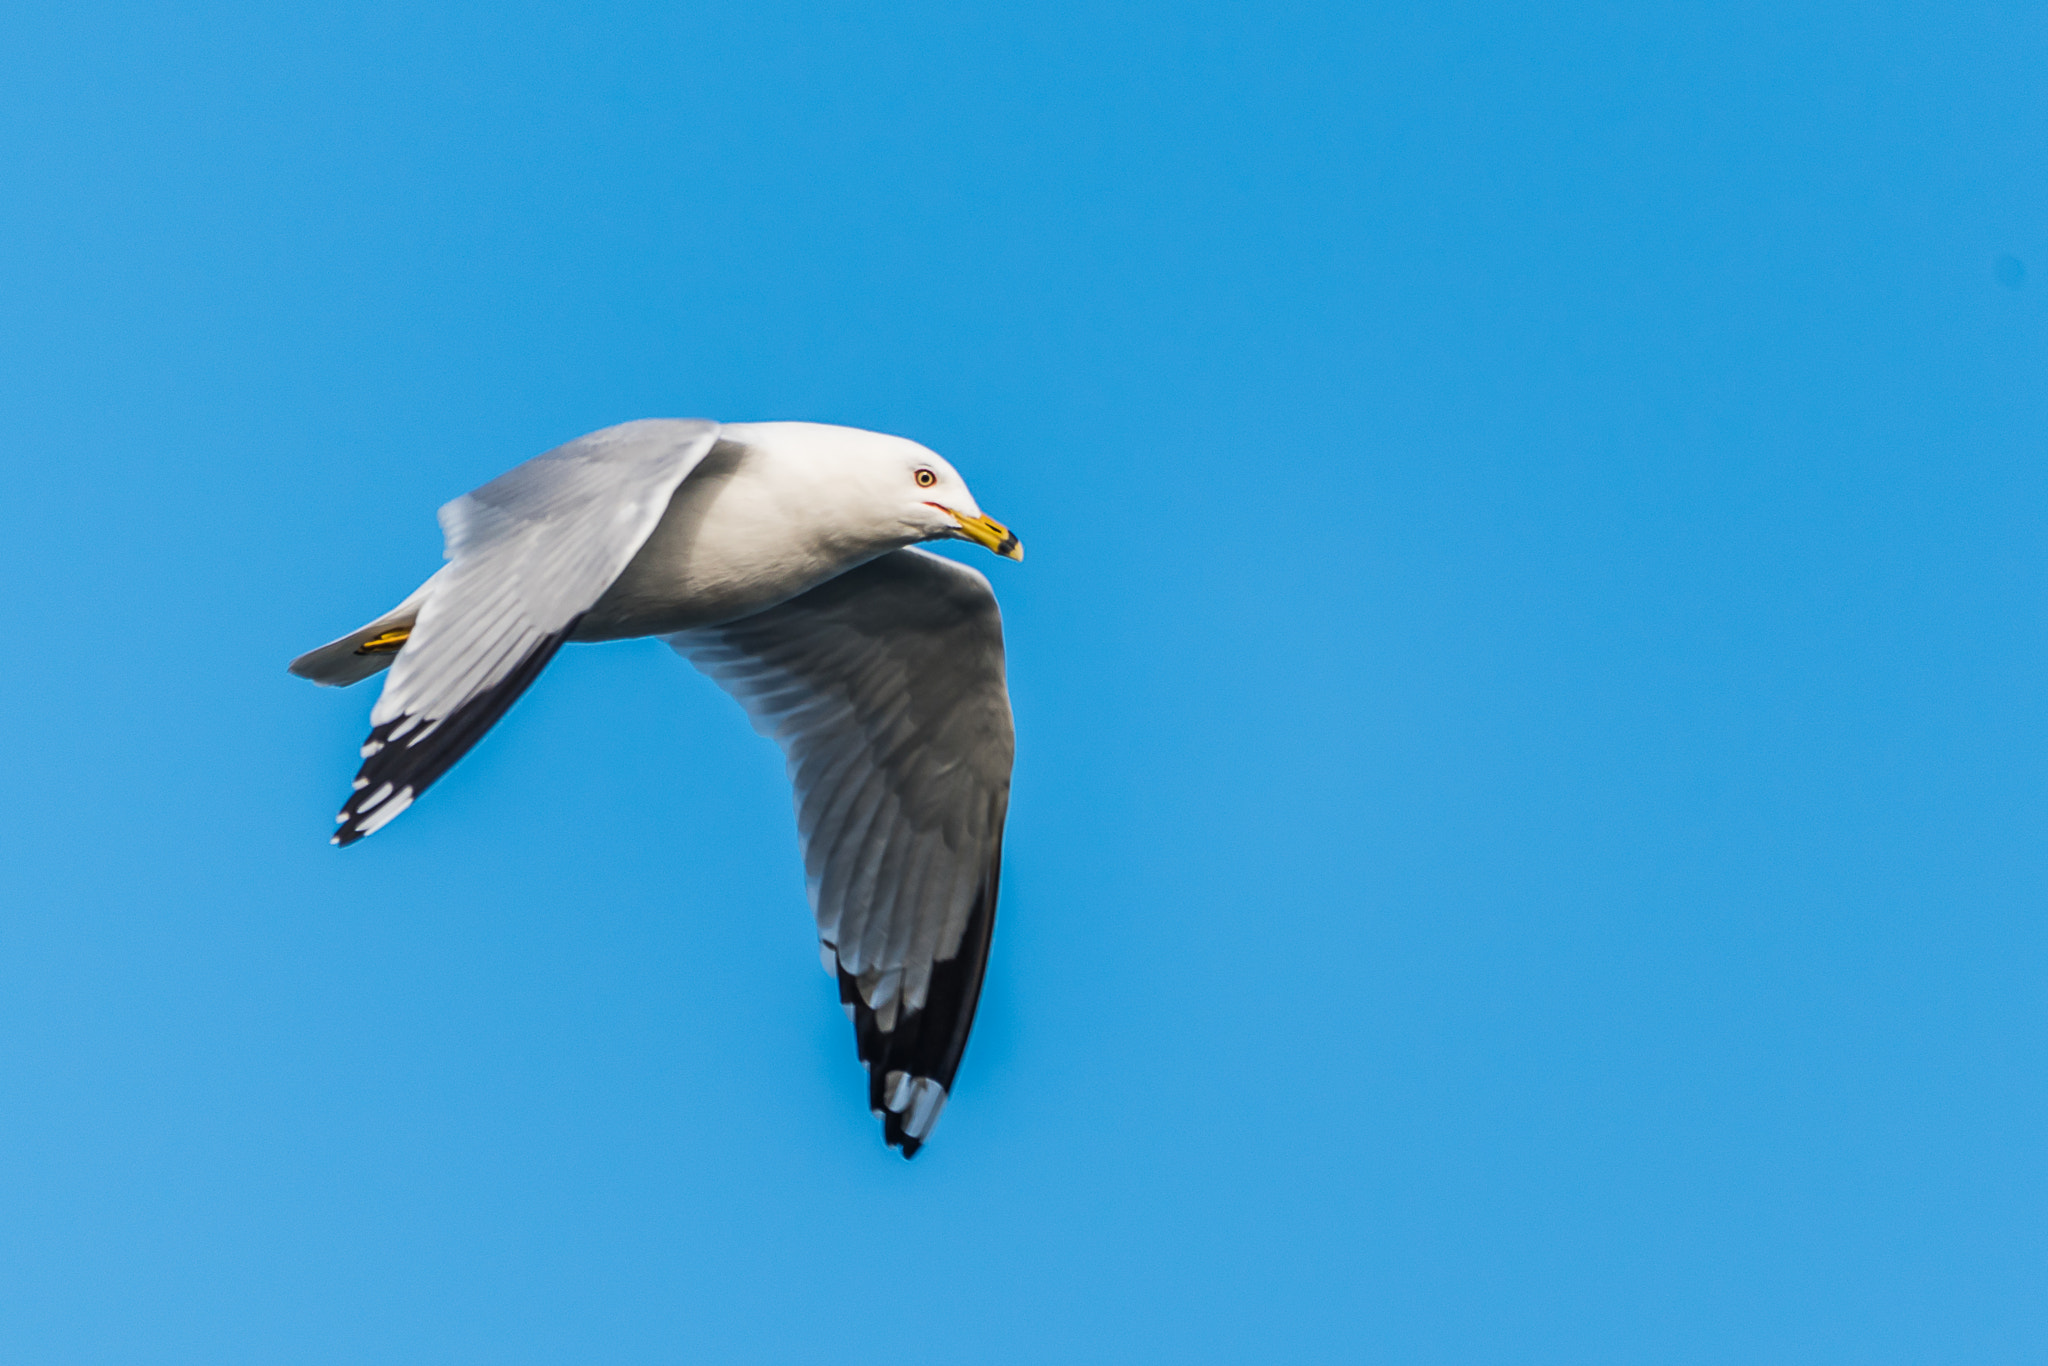 Nikon D750 sample photo. Fly high - ring-billed seagull photography